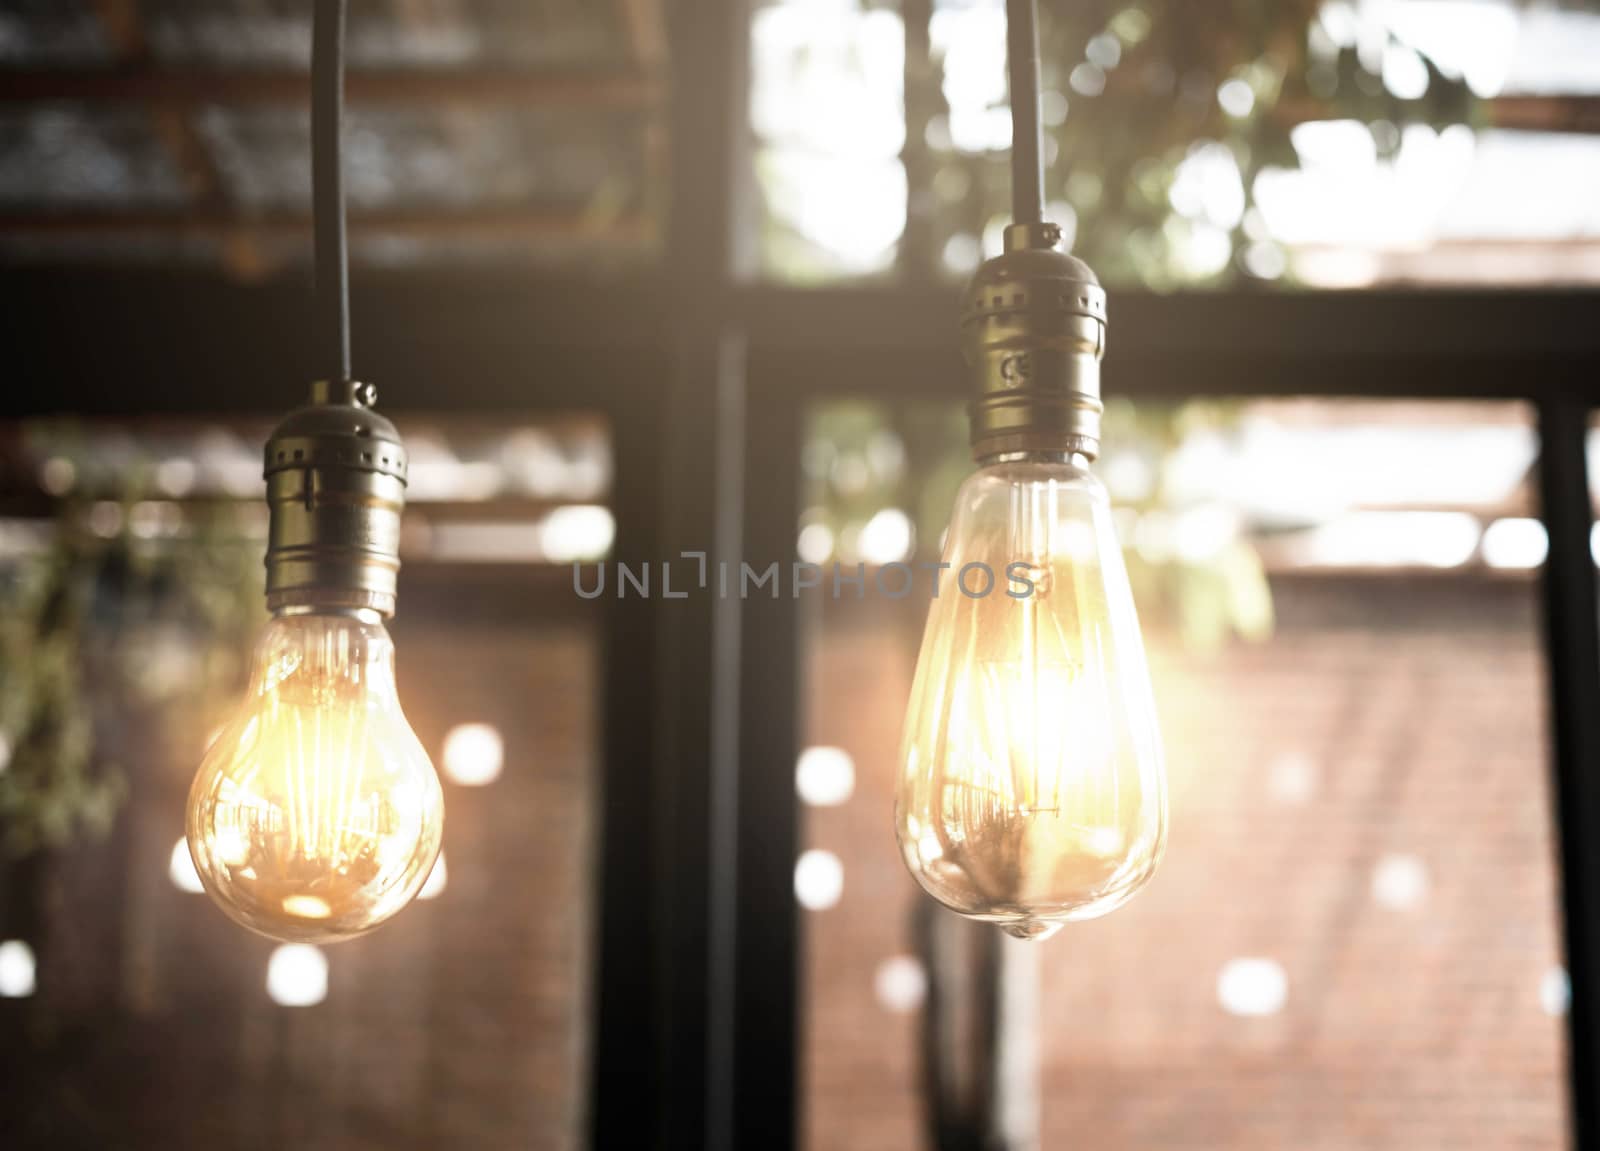 Decorative antique edison style light bulbs in the cafe. Lighting decor indoors concept. by TEERASAK